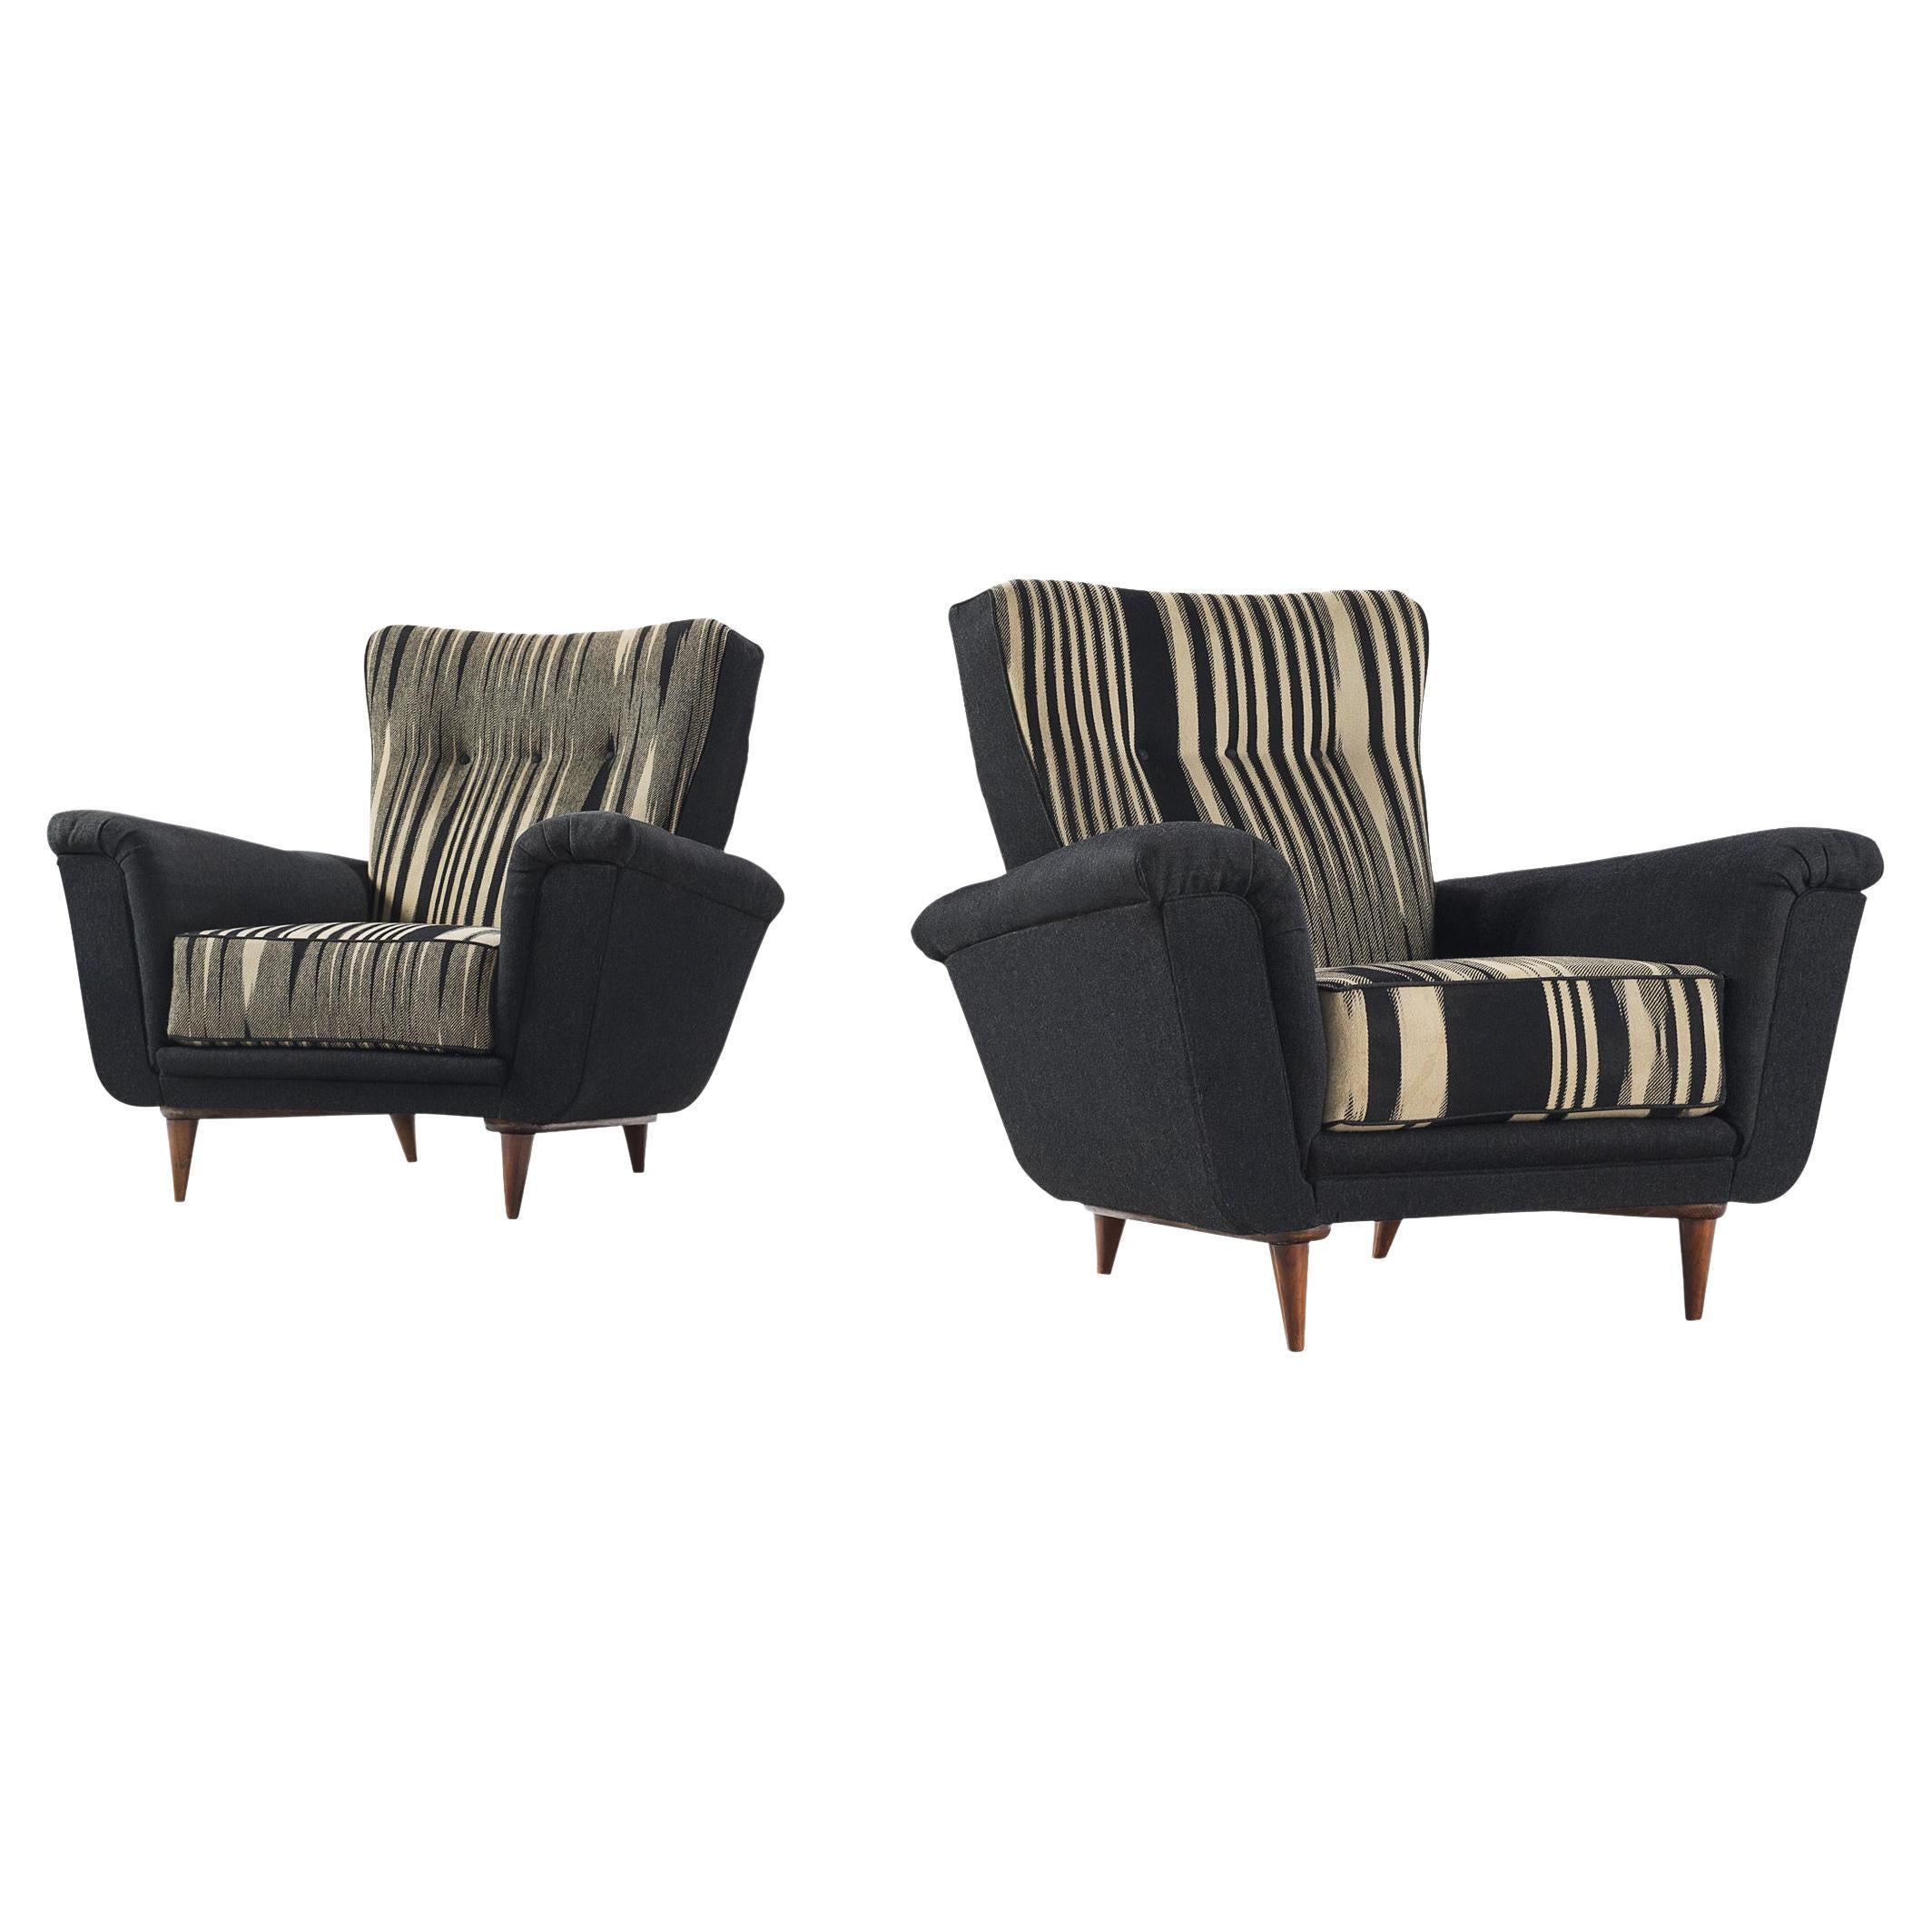 Theo Ruth for Artifort Pair of Lounge Chairs in Original Striped Upholstery  For Sale